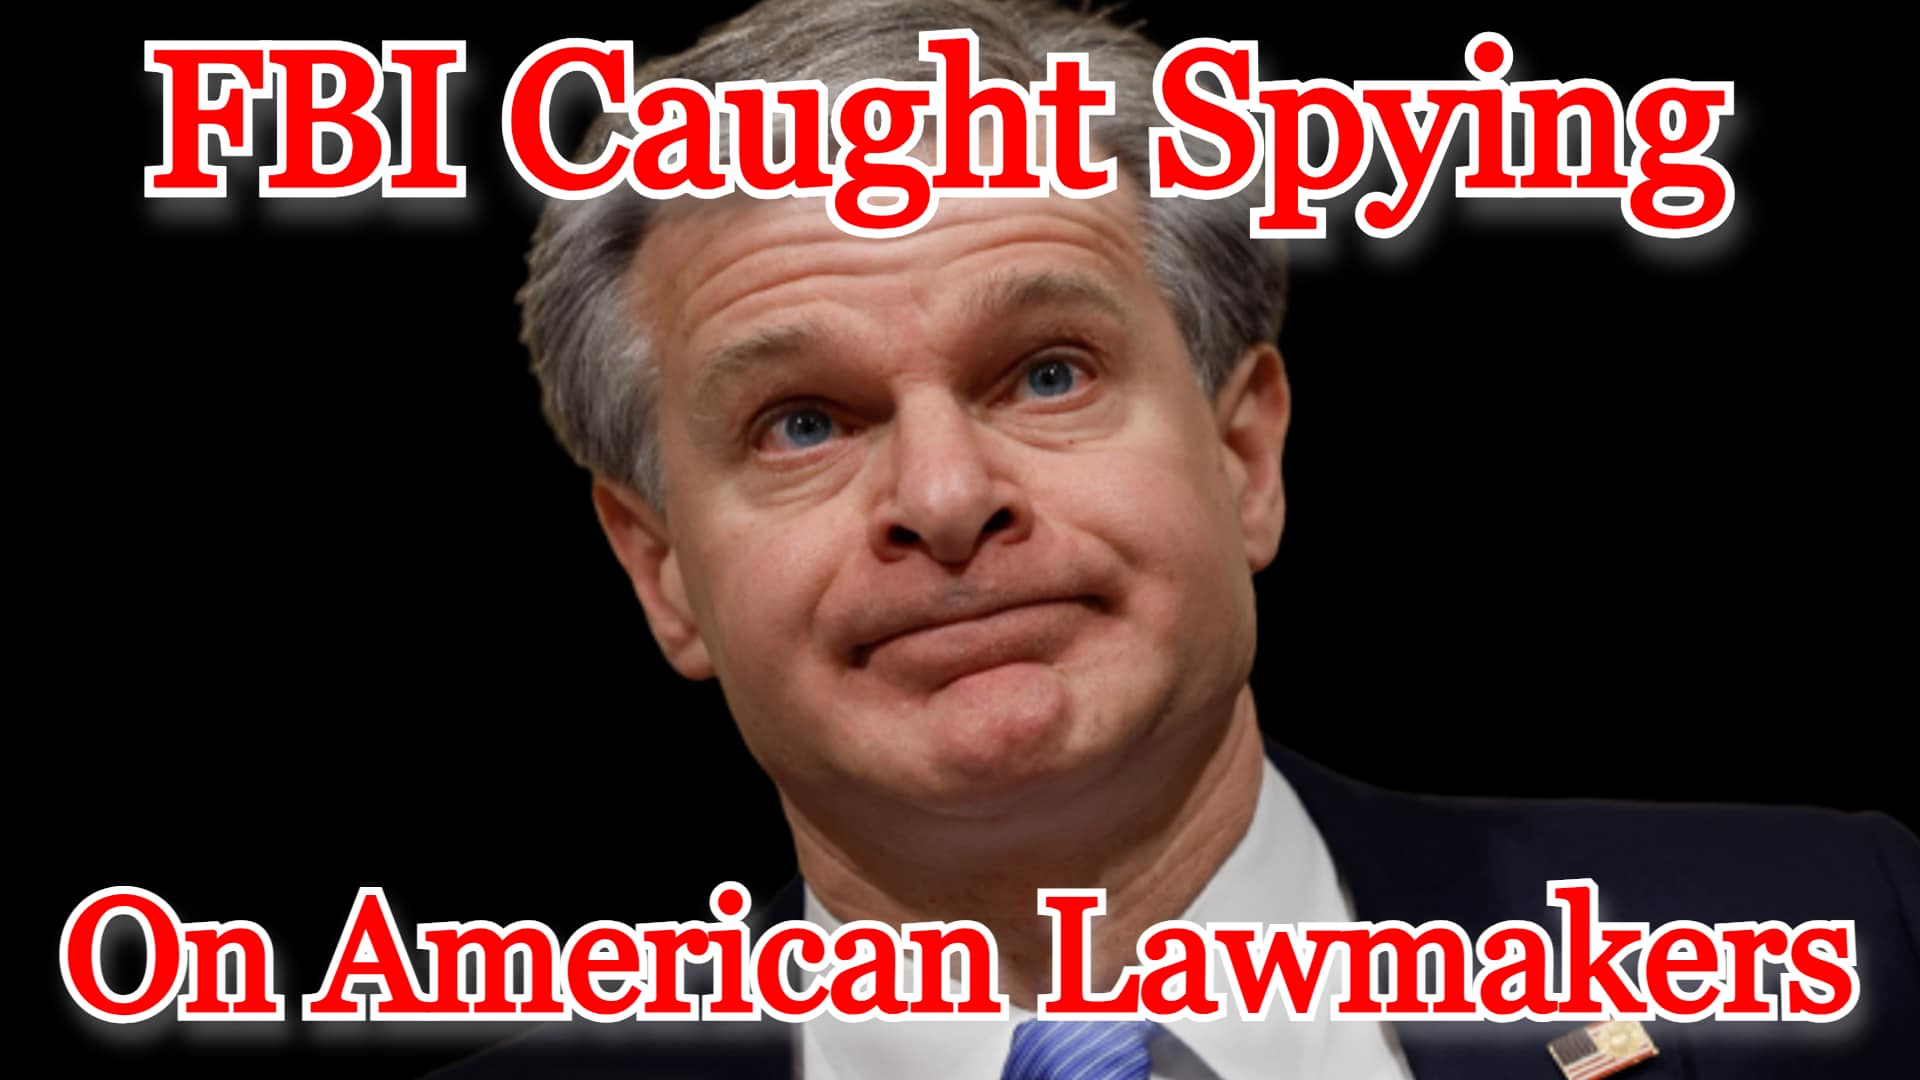 COI #452: FBI Caught Spying on American Lawmakers